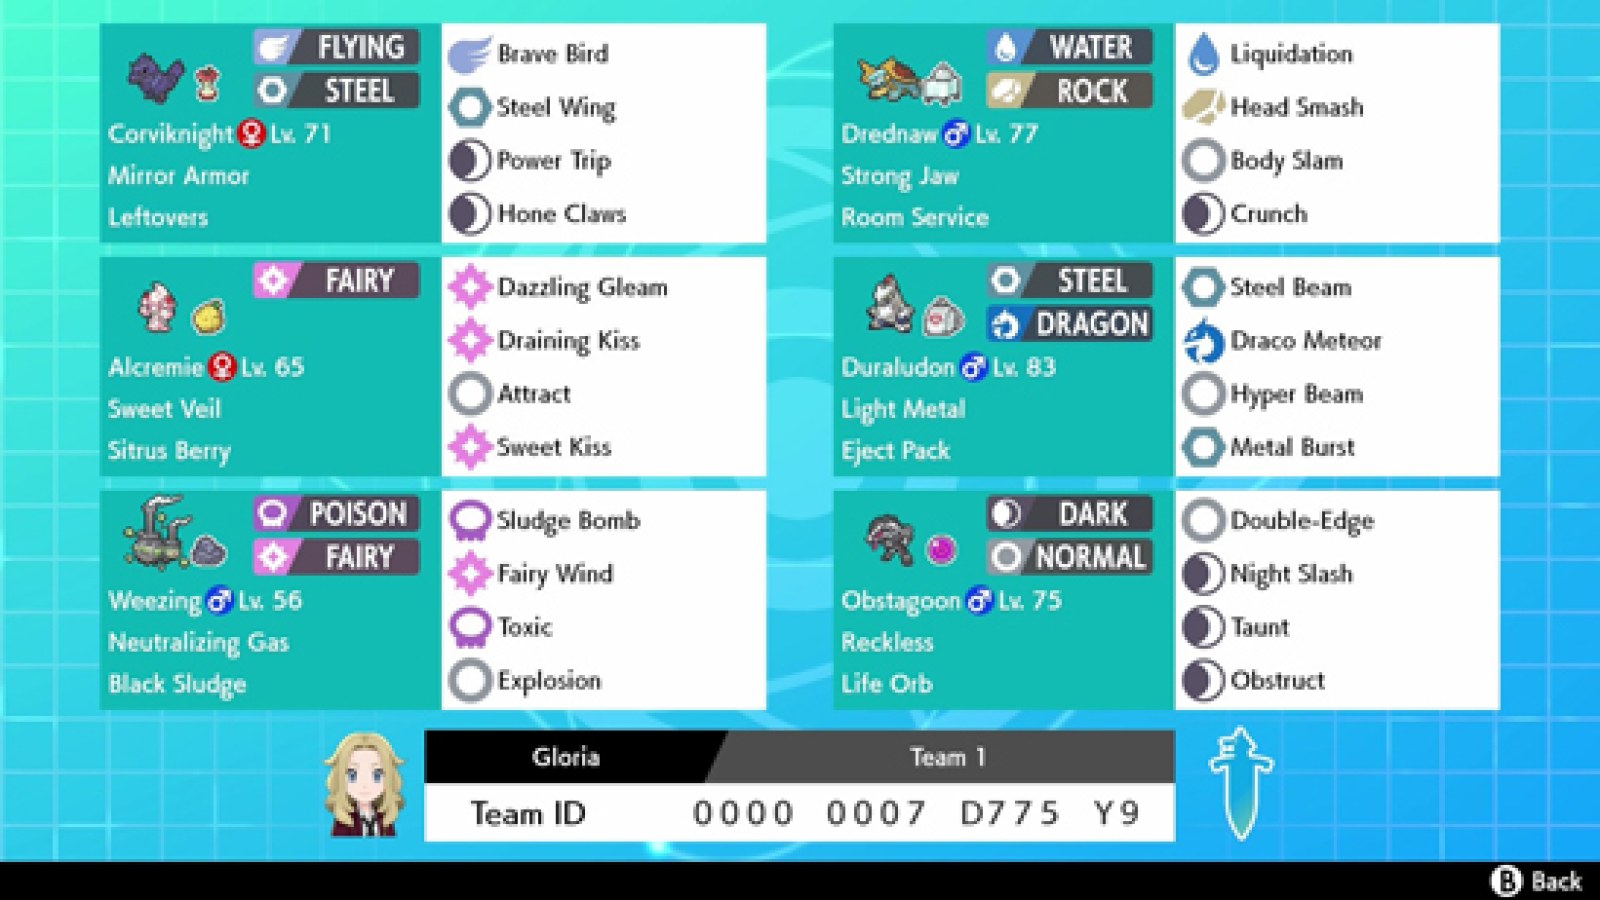 What is a good in-game team for Sword and Shield? - PokéBase